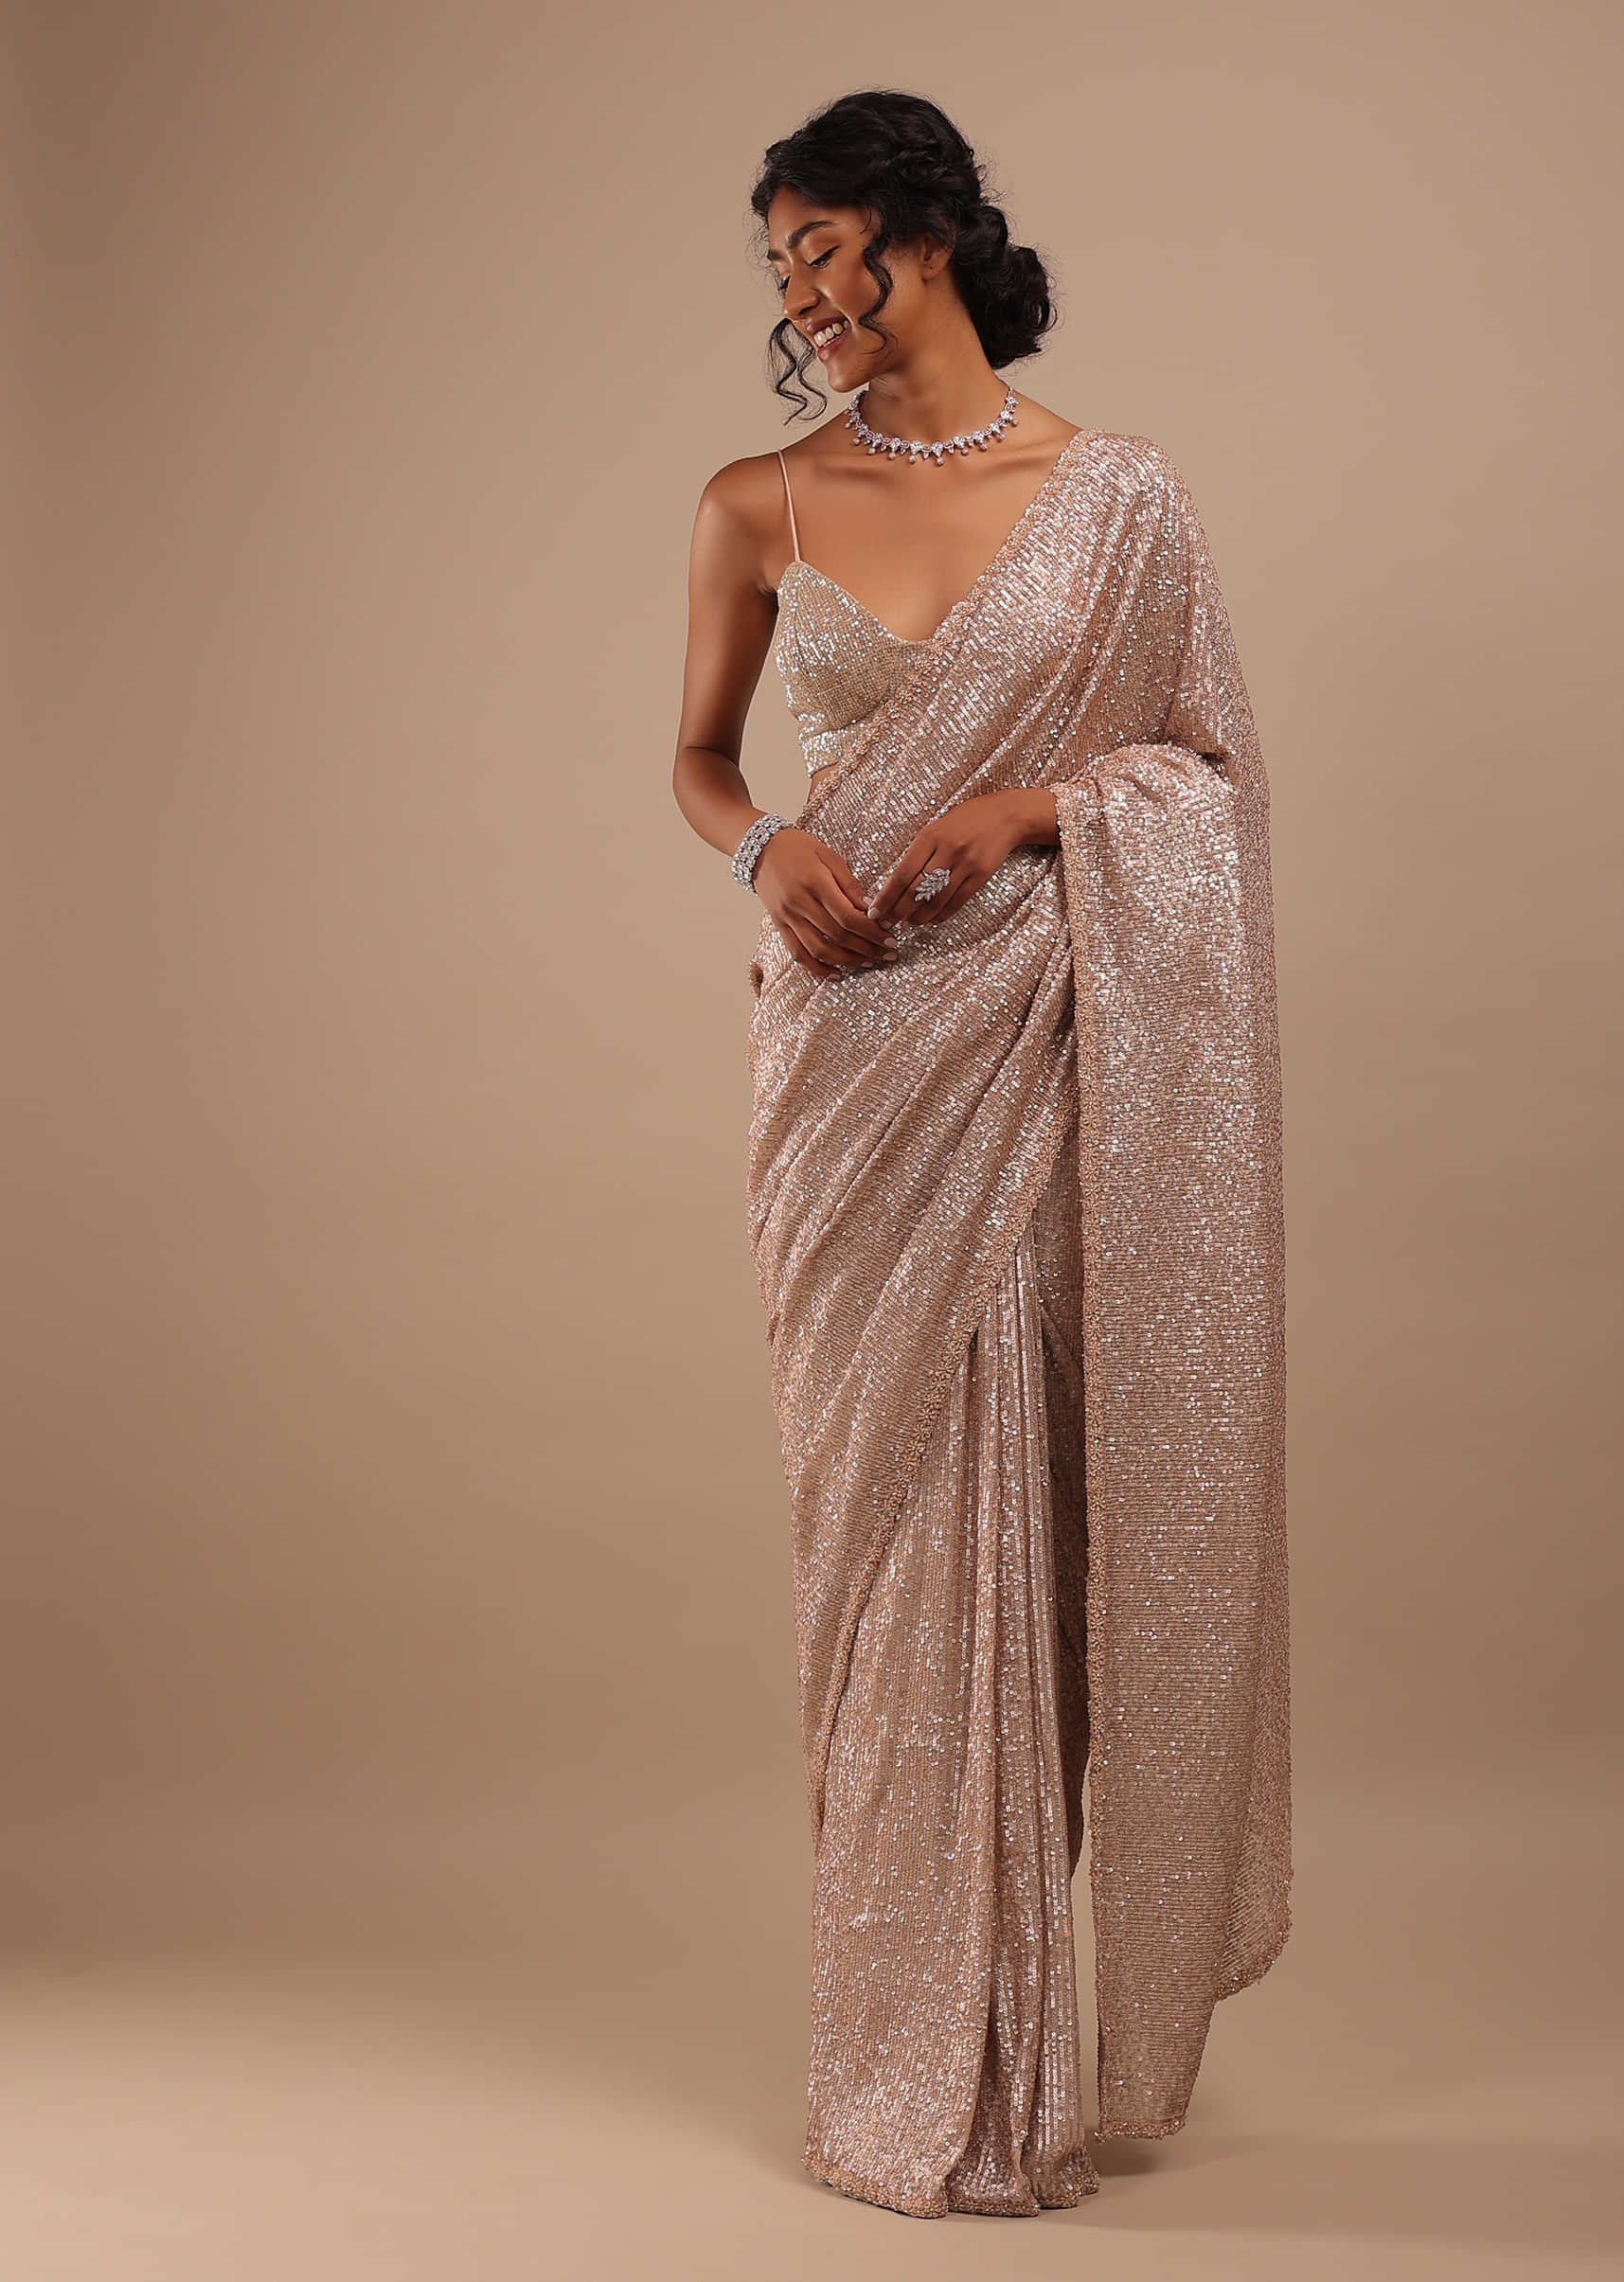 Peach Shimmer Saree In Gold Sequins Embroidery With Stones And Beads On The Border